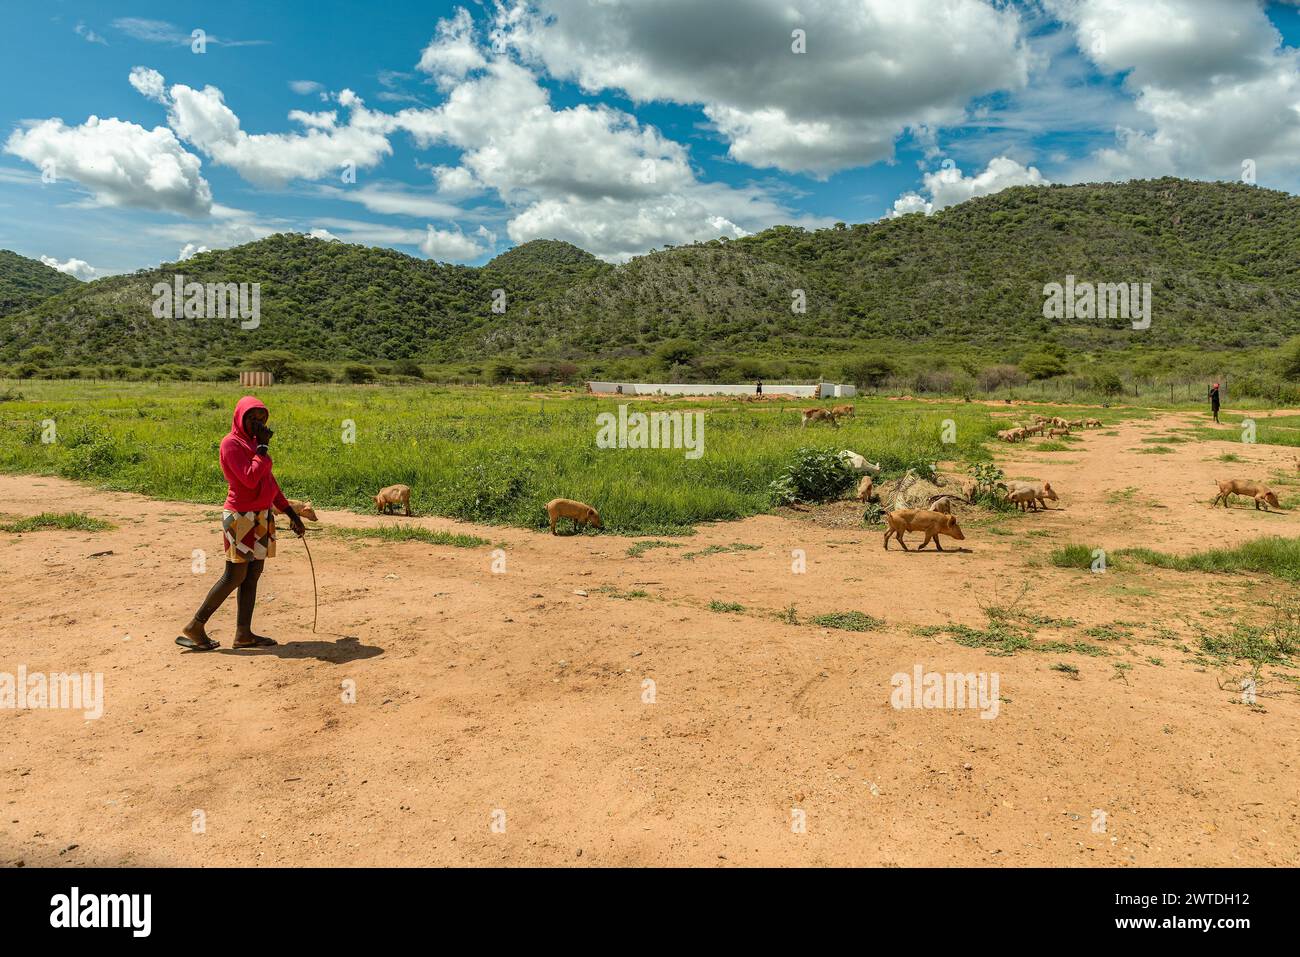 Herdswoman with a group of pigs, Otavi, Namibia Stock Photo